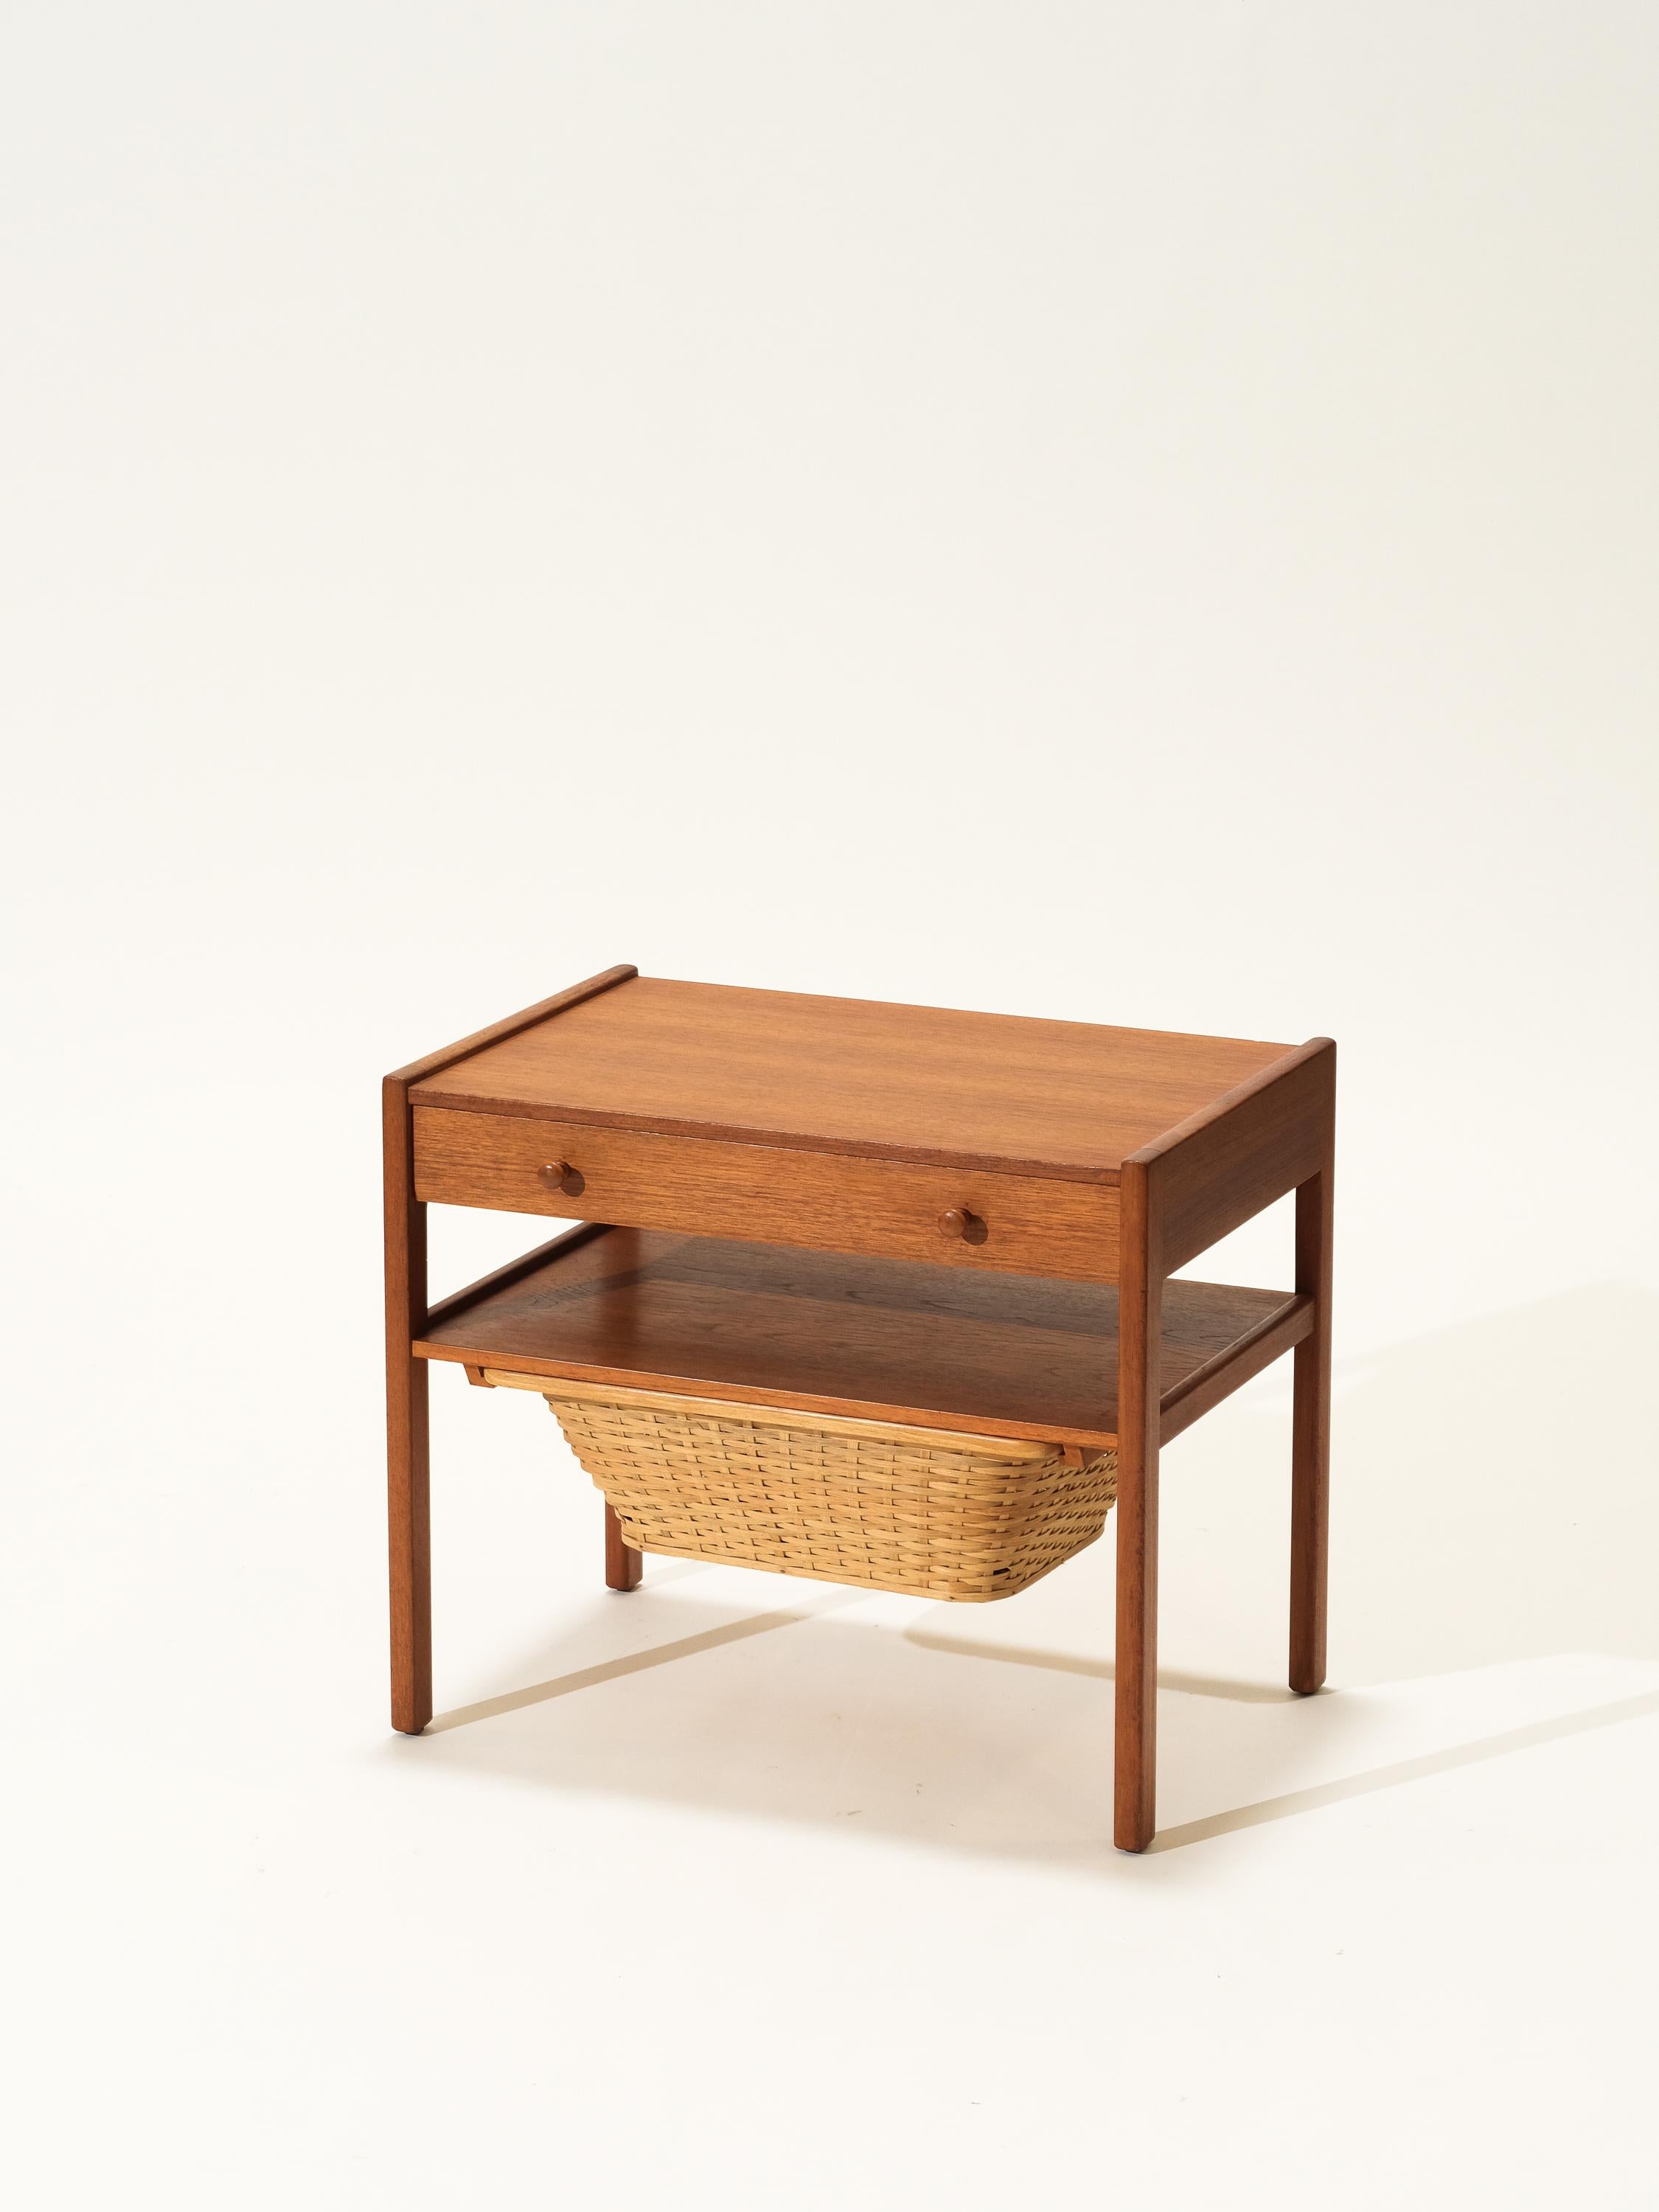 Vintage Scandinavian modern side table features a pull-out woven rattan basket and a large drawer. Sleek and sturdy design, beautiful teak wood grain and a finished back. This piece can be used as a sewing table, end table or a decorative piece.